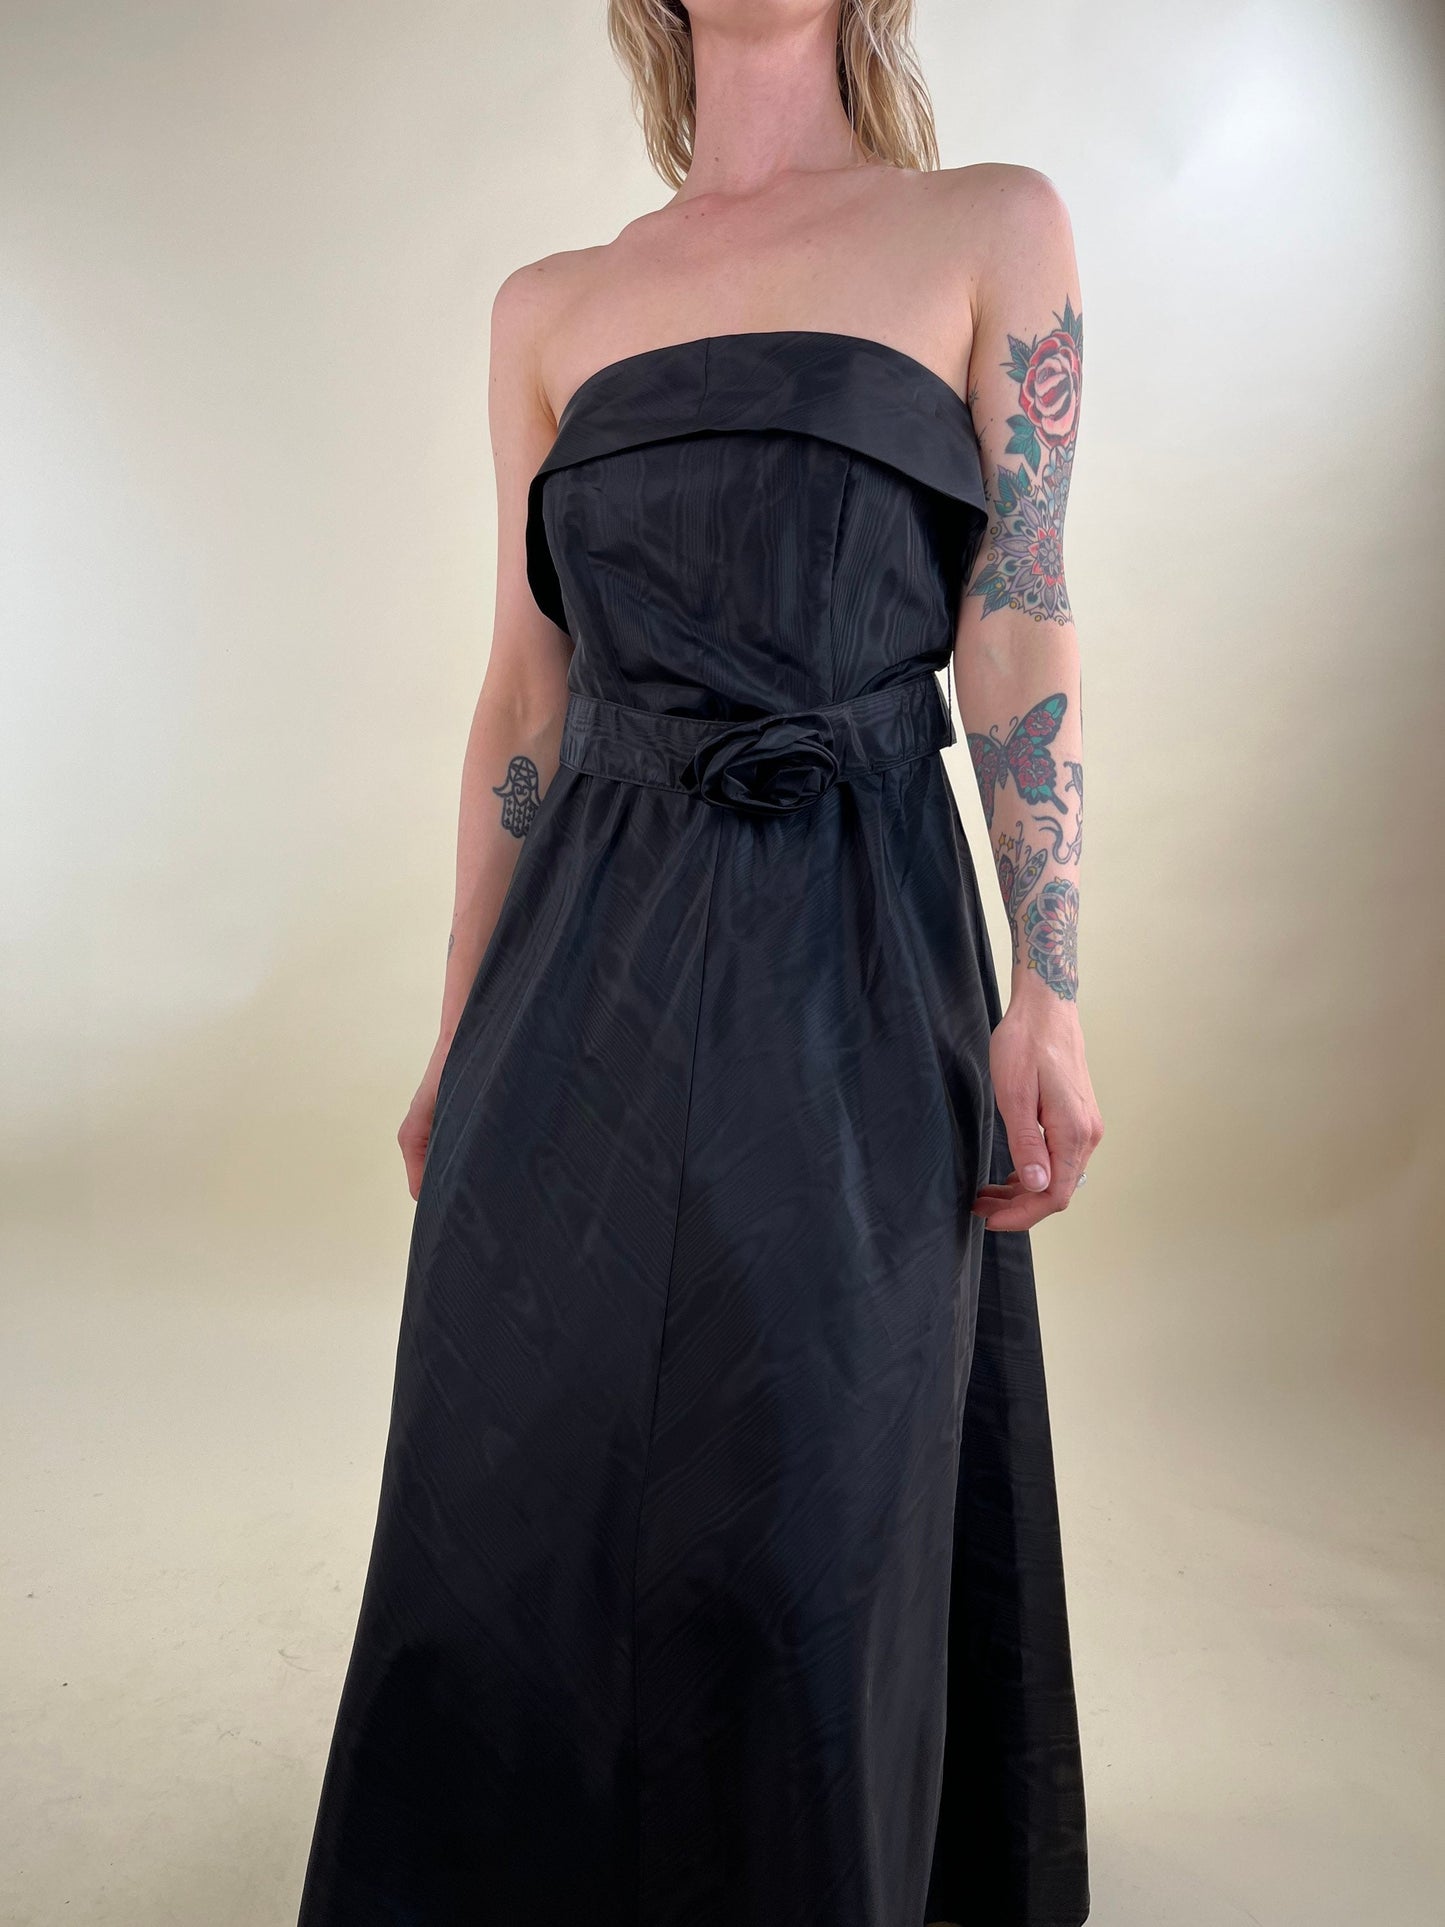 80s Does 50s Strapless Black Cocktail Dress